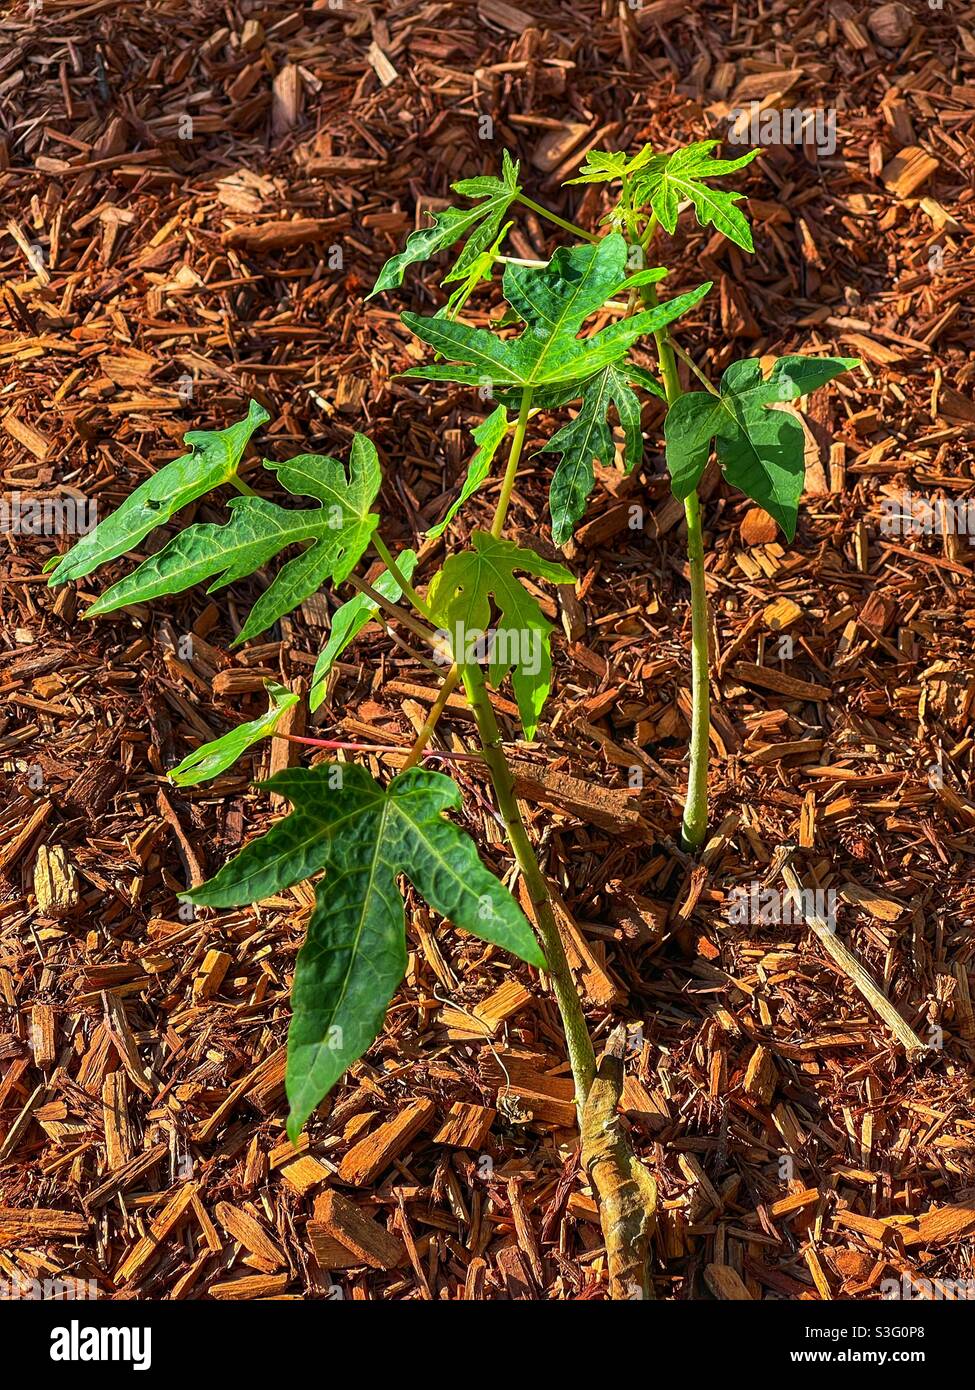 Papaya trees grown from seed developing in a garden bed Stock Photo